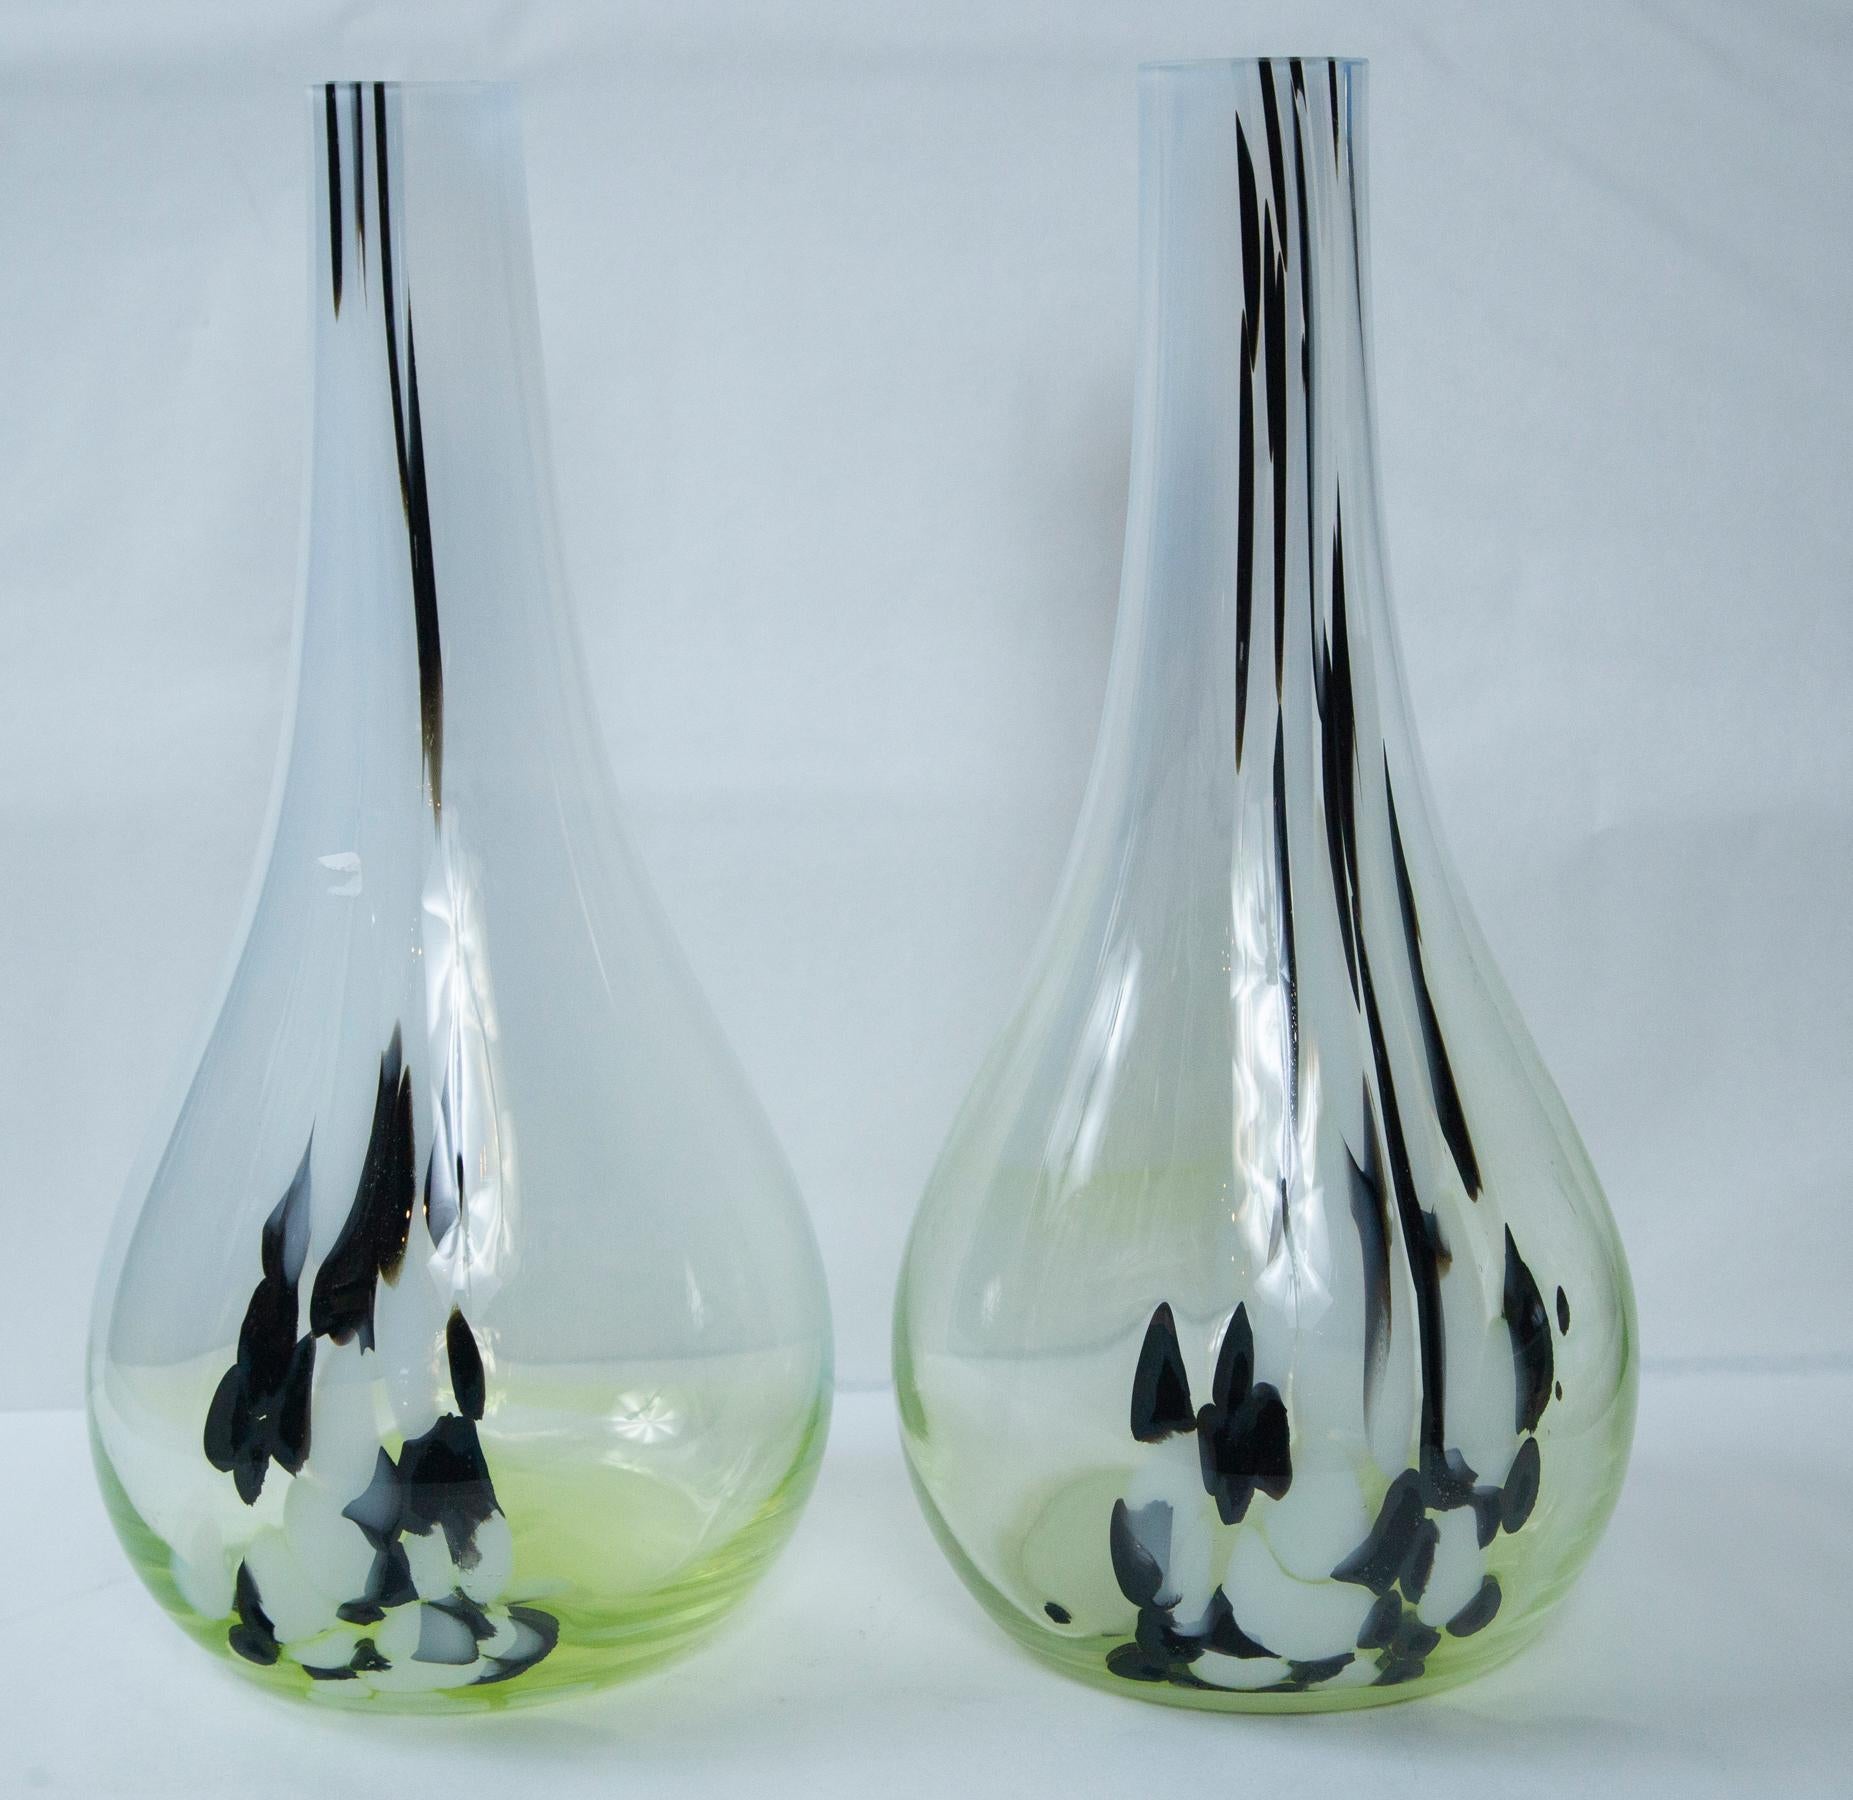 The pair are unsigned but according to the previous owner, were bought in Venice in the 1960s.
Milky white glass with glass streaks of black and white and a yellow/green bottom.
   